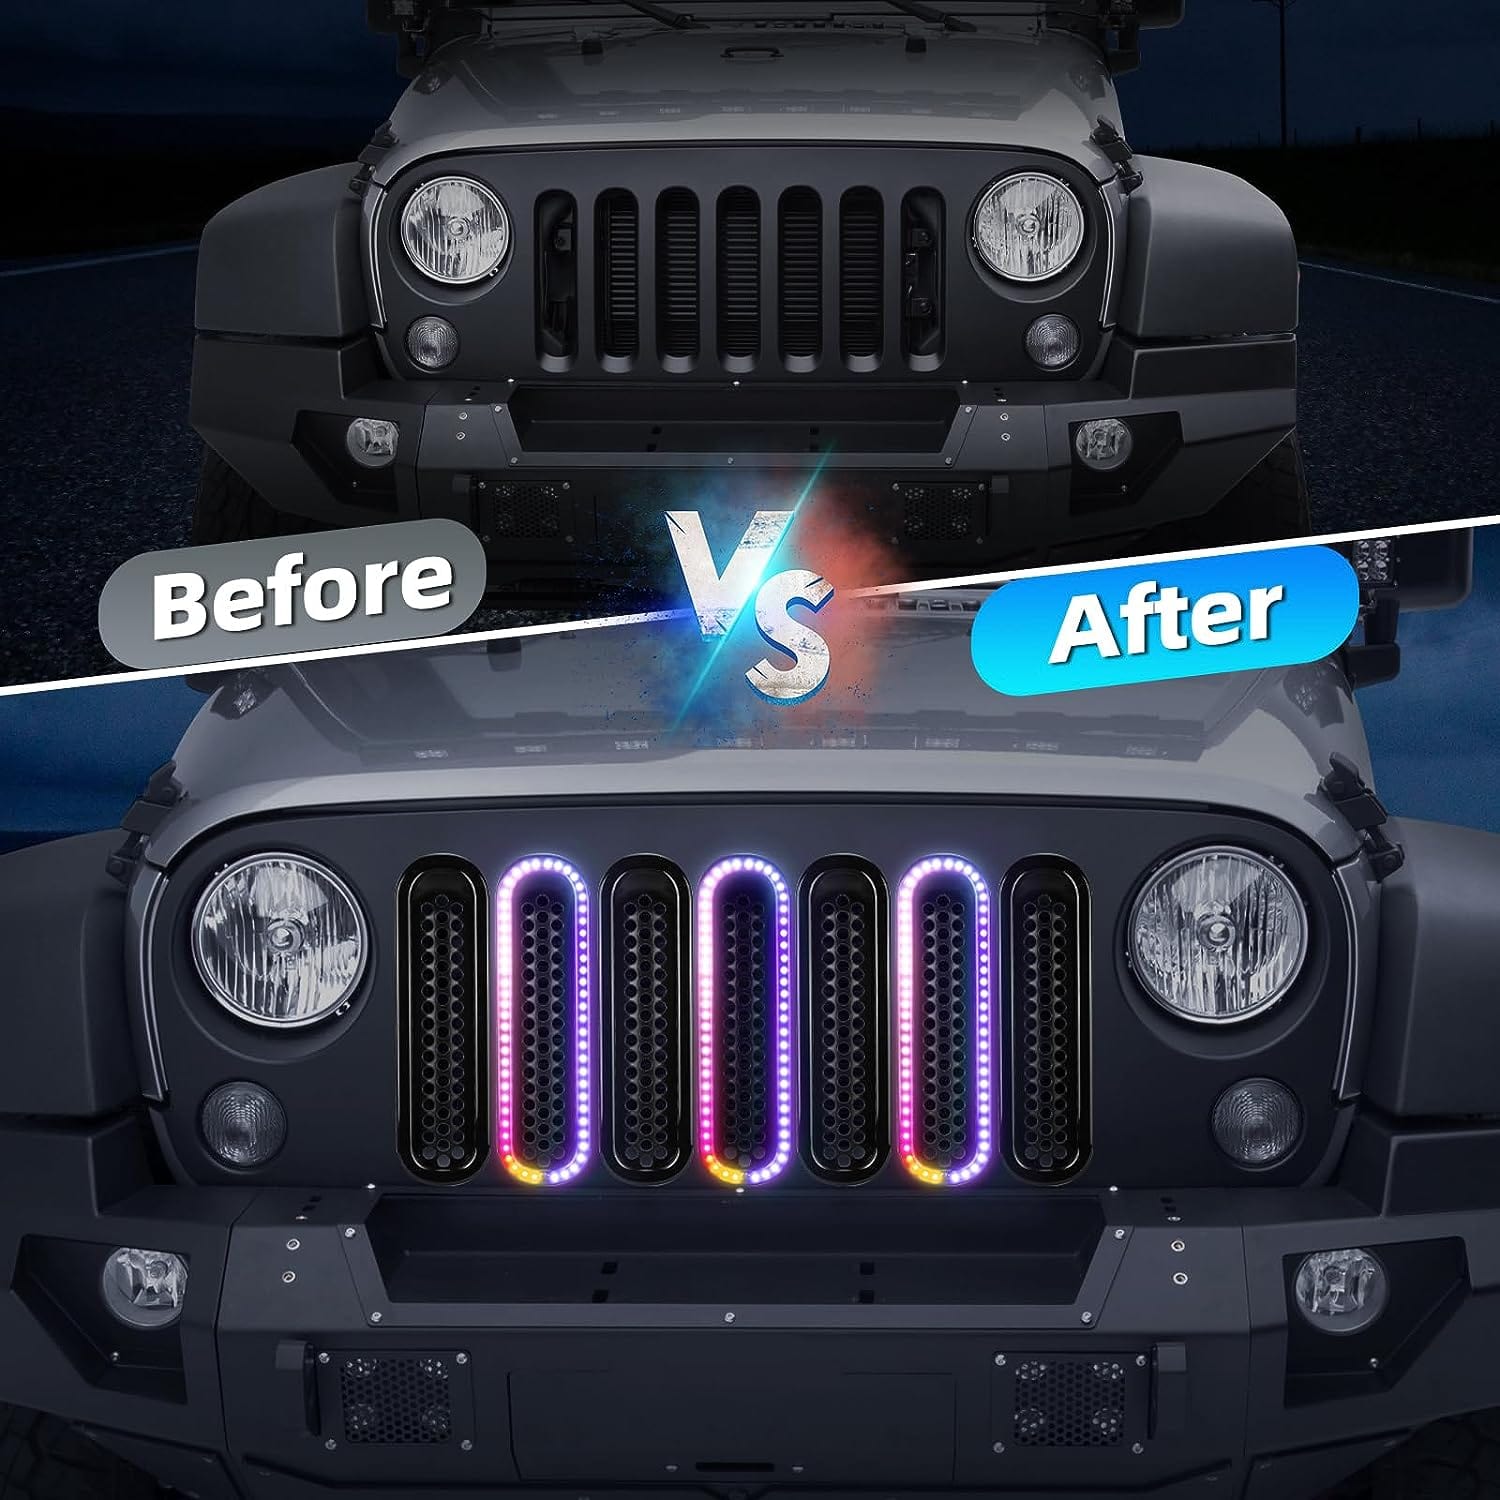 SUPAREE Jeep Grille Light Suparee Jeep Wrangler Grille Inserts with RGB White DRL Lights for 2007-2015 JK JKU Product description